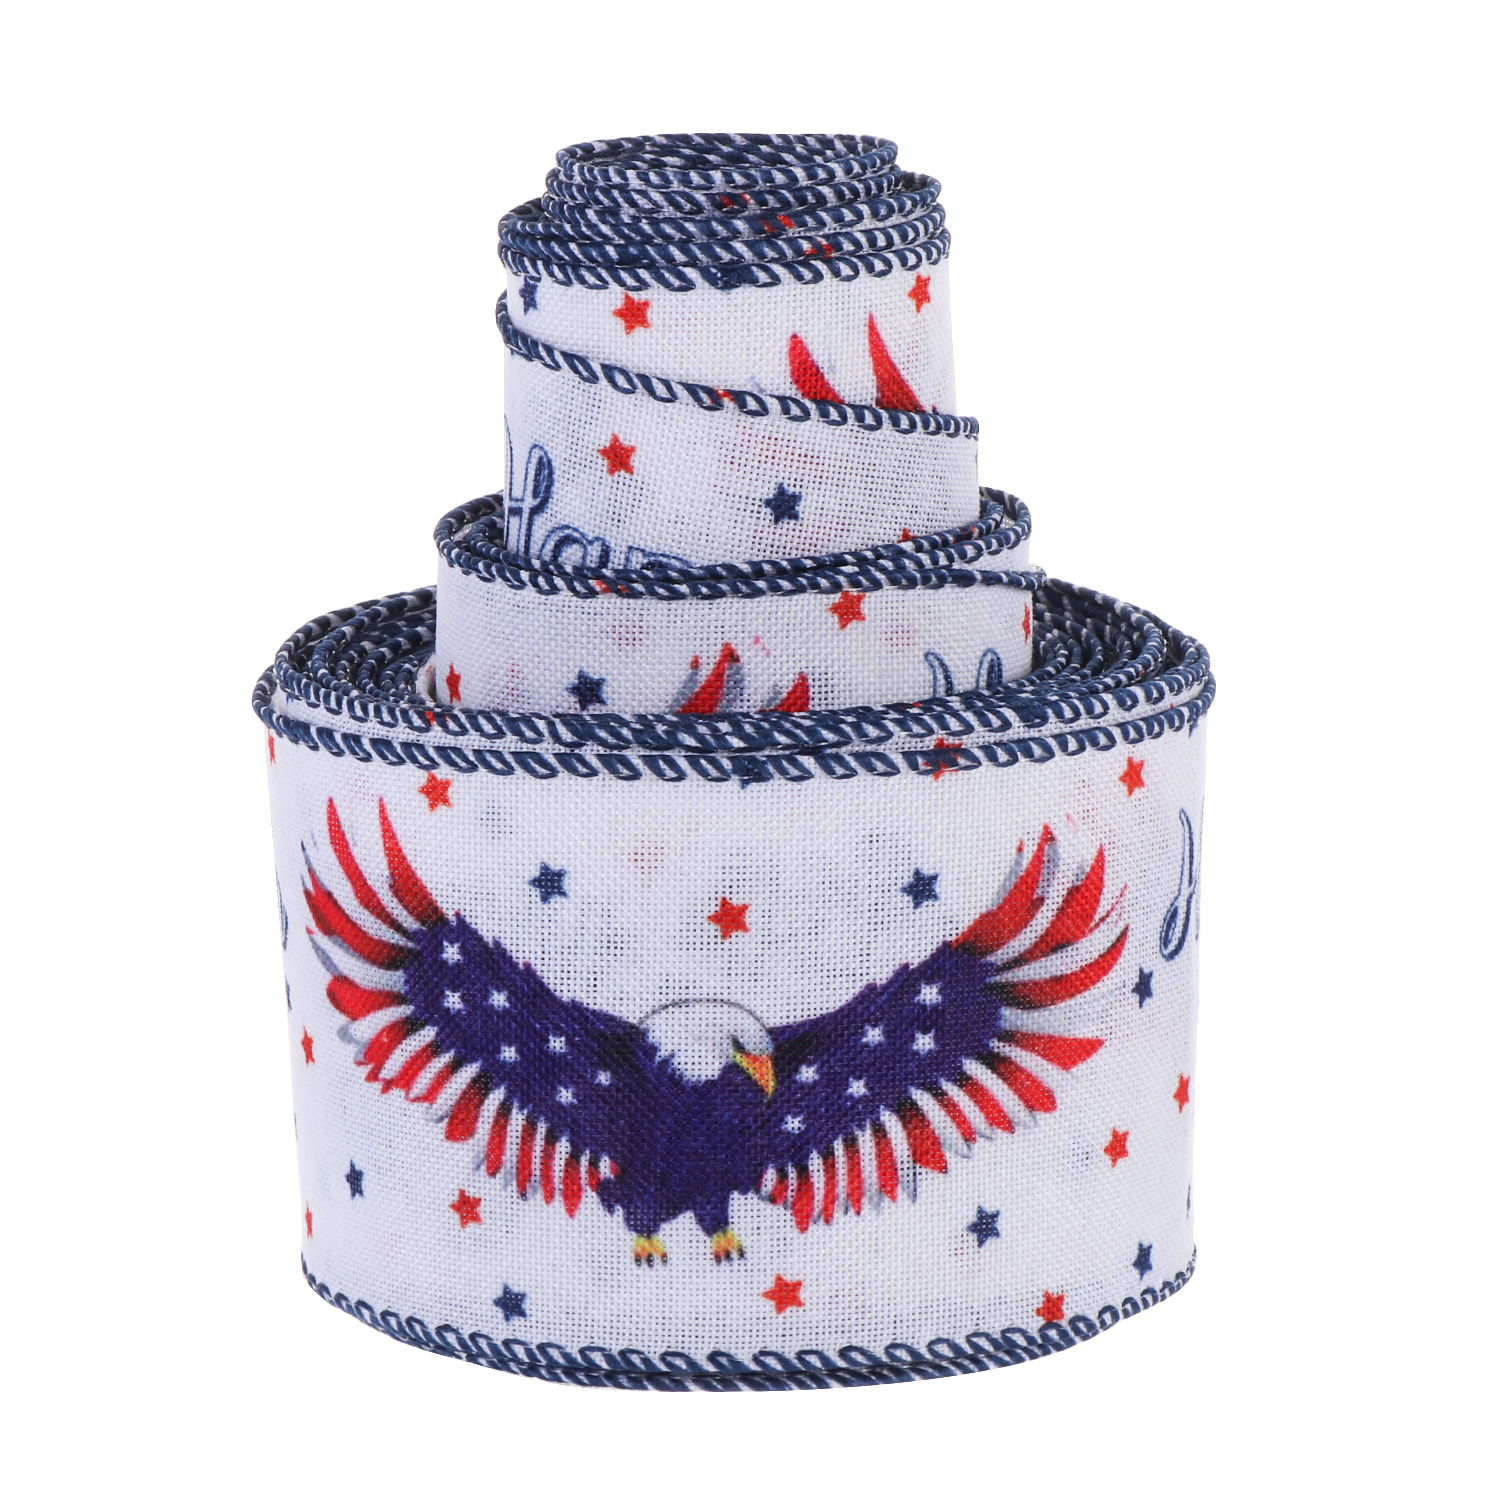 ❤LANSEL❤ New Color Ribbon Crafts Accessories Holiday Decoration Independence Day Gift Wrapping Star July 4 Bows DIY Red Blue White Eagle Cake wrapping Ribbon